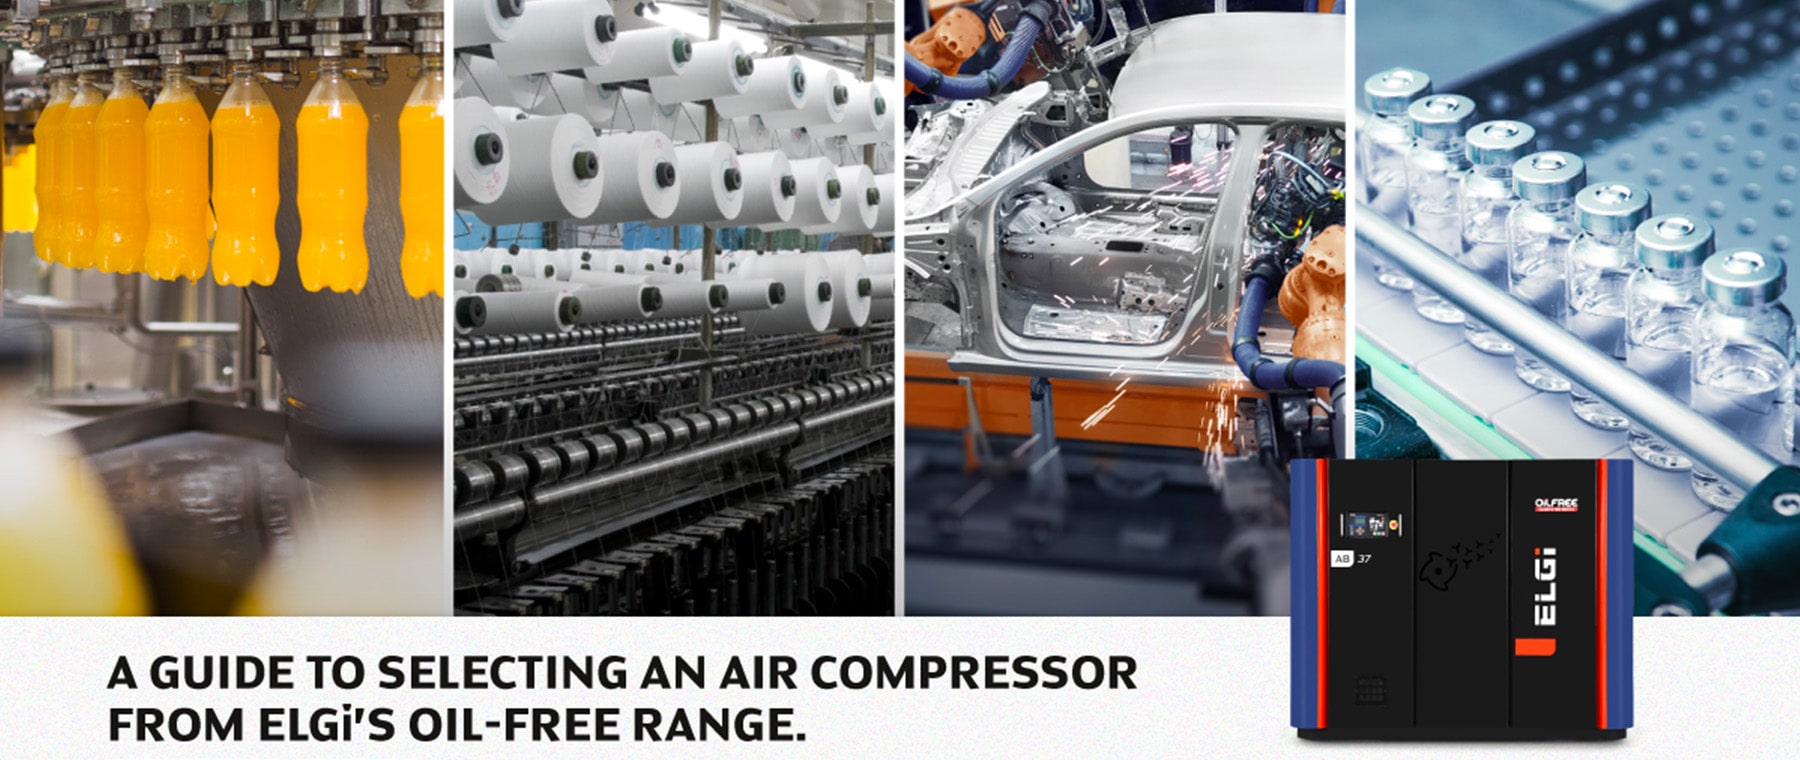 Frequently asked questions while selecting an oil-free air compressor